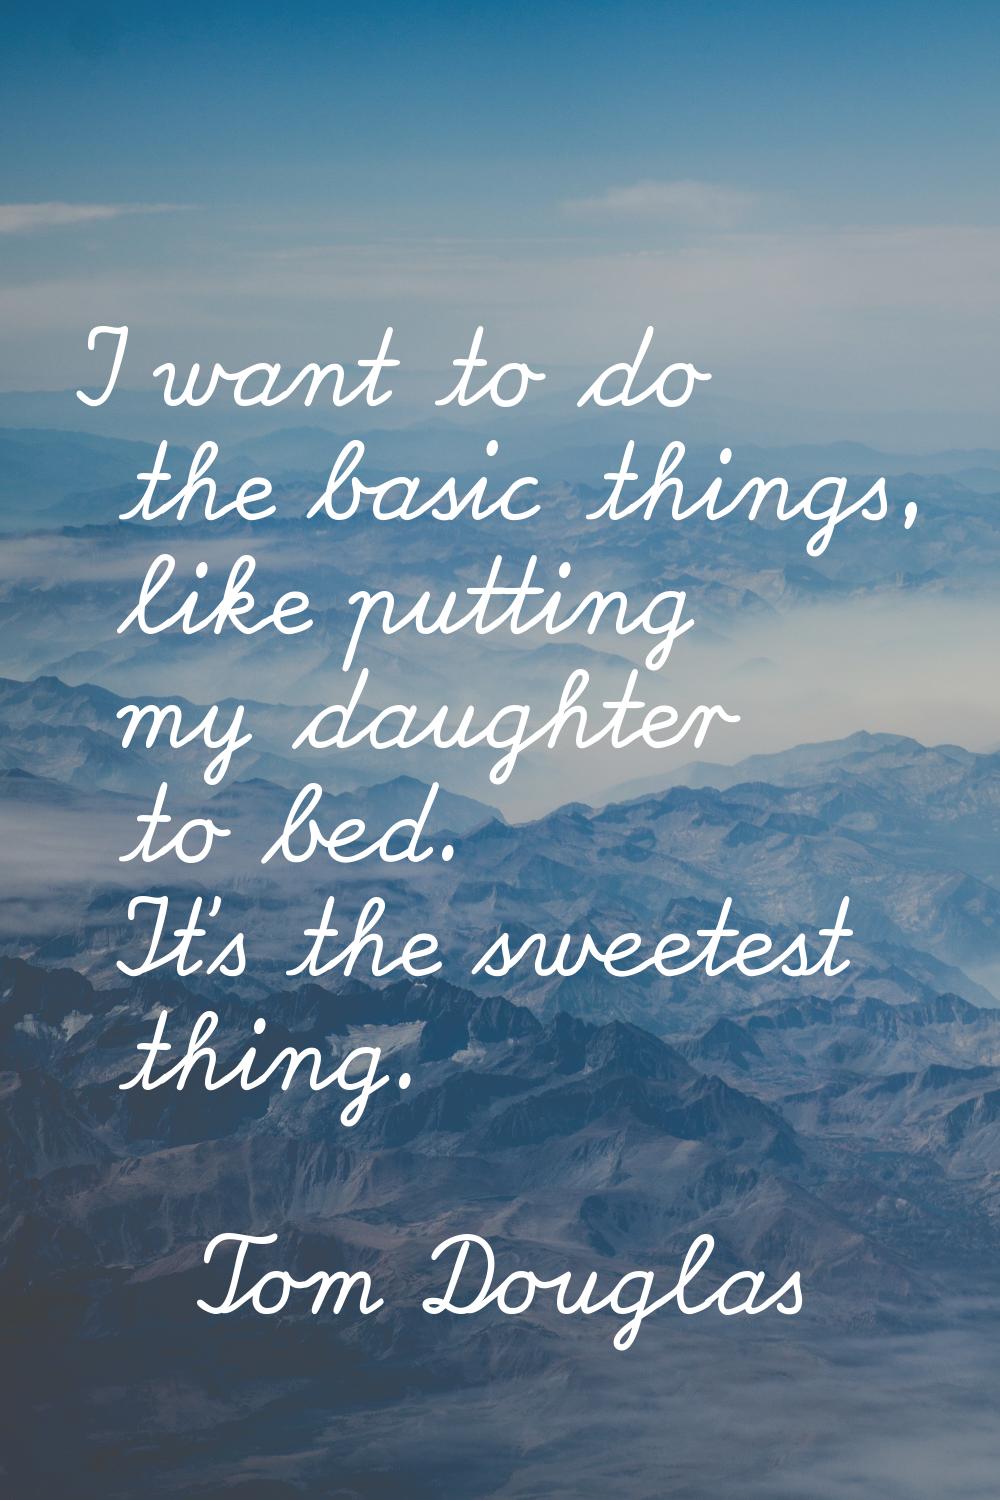 I want to do the basic things, like putting my daughter to bed. It's the sweetest thing.